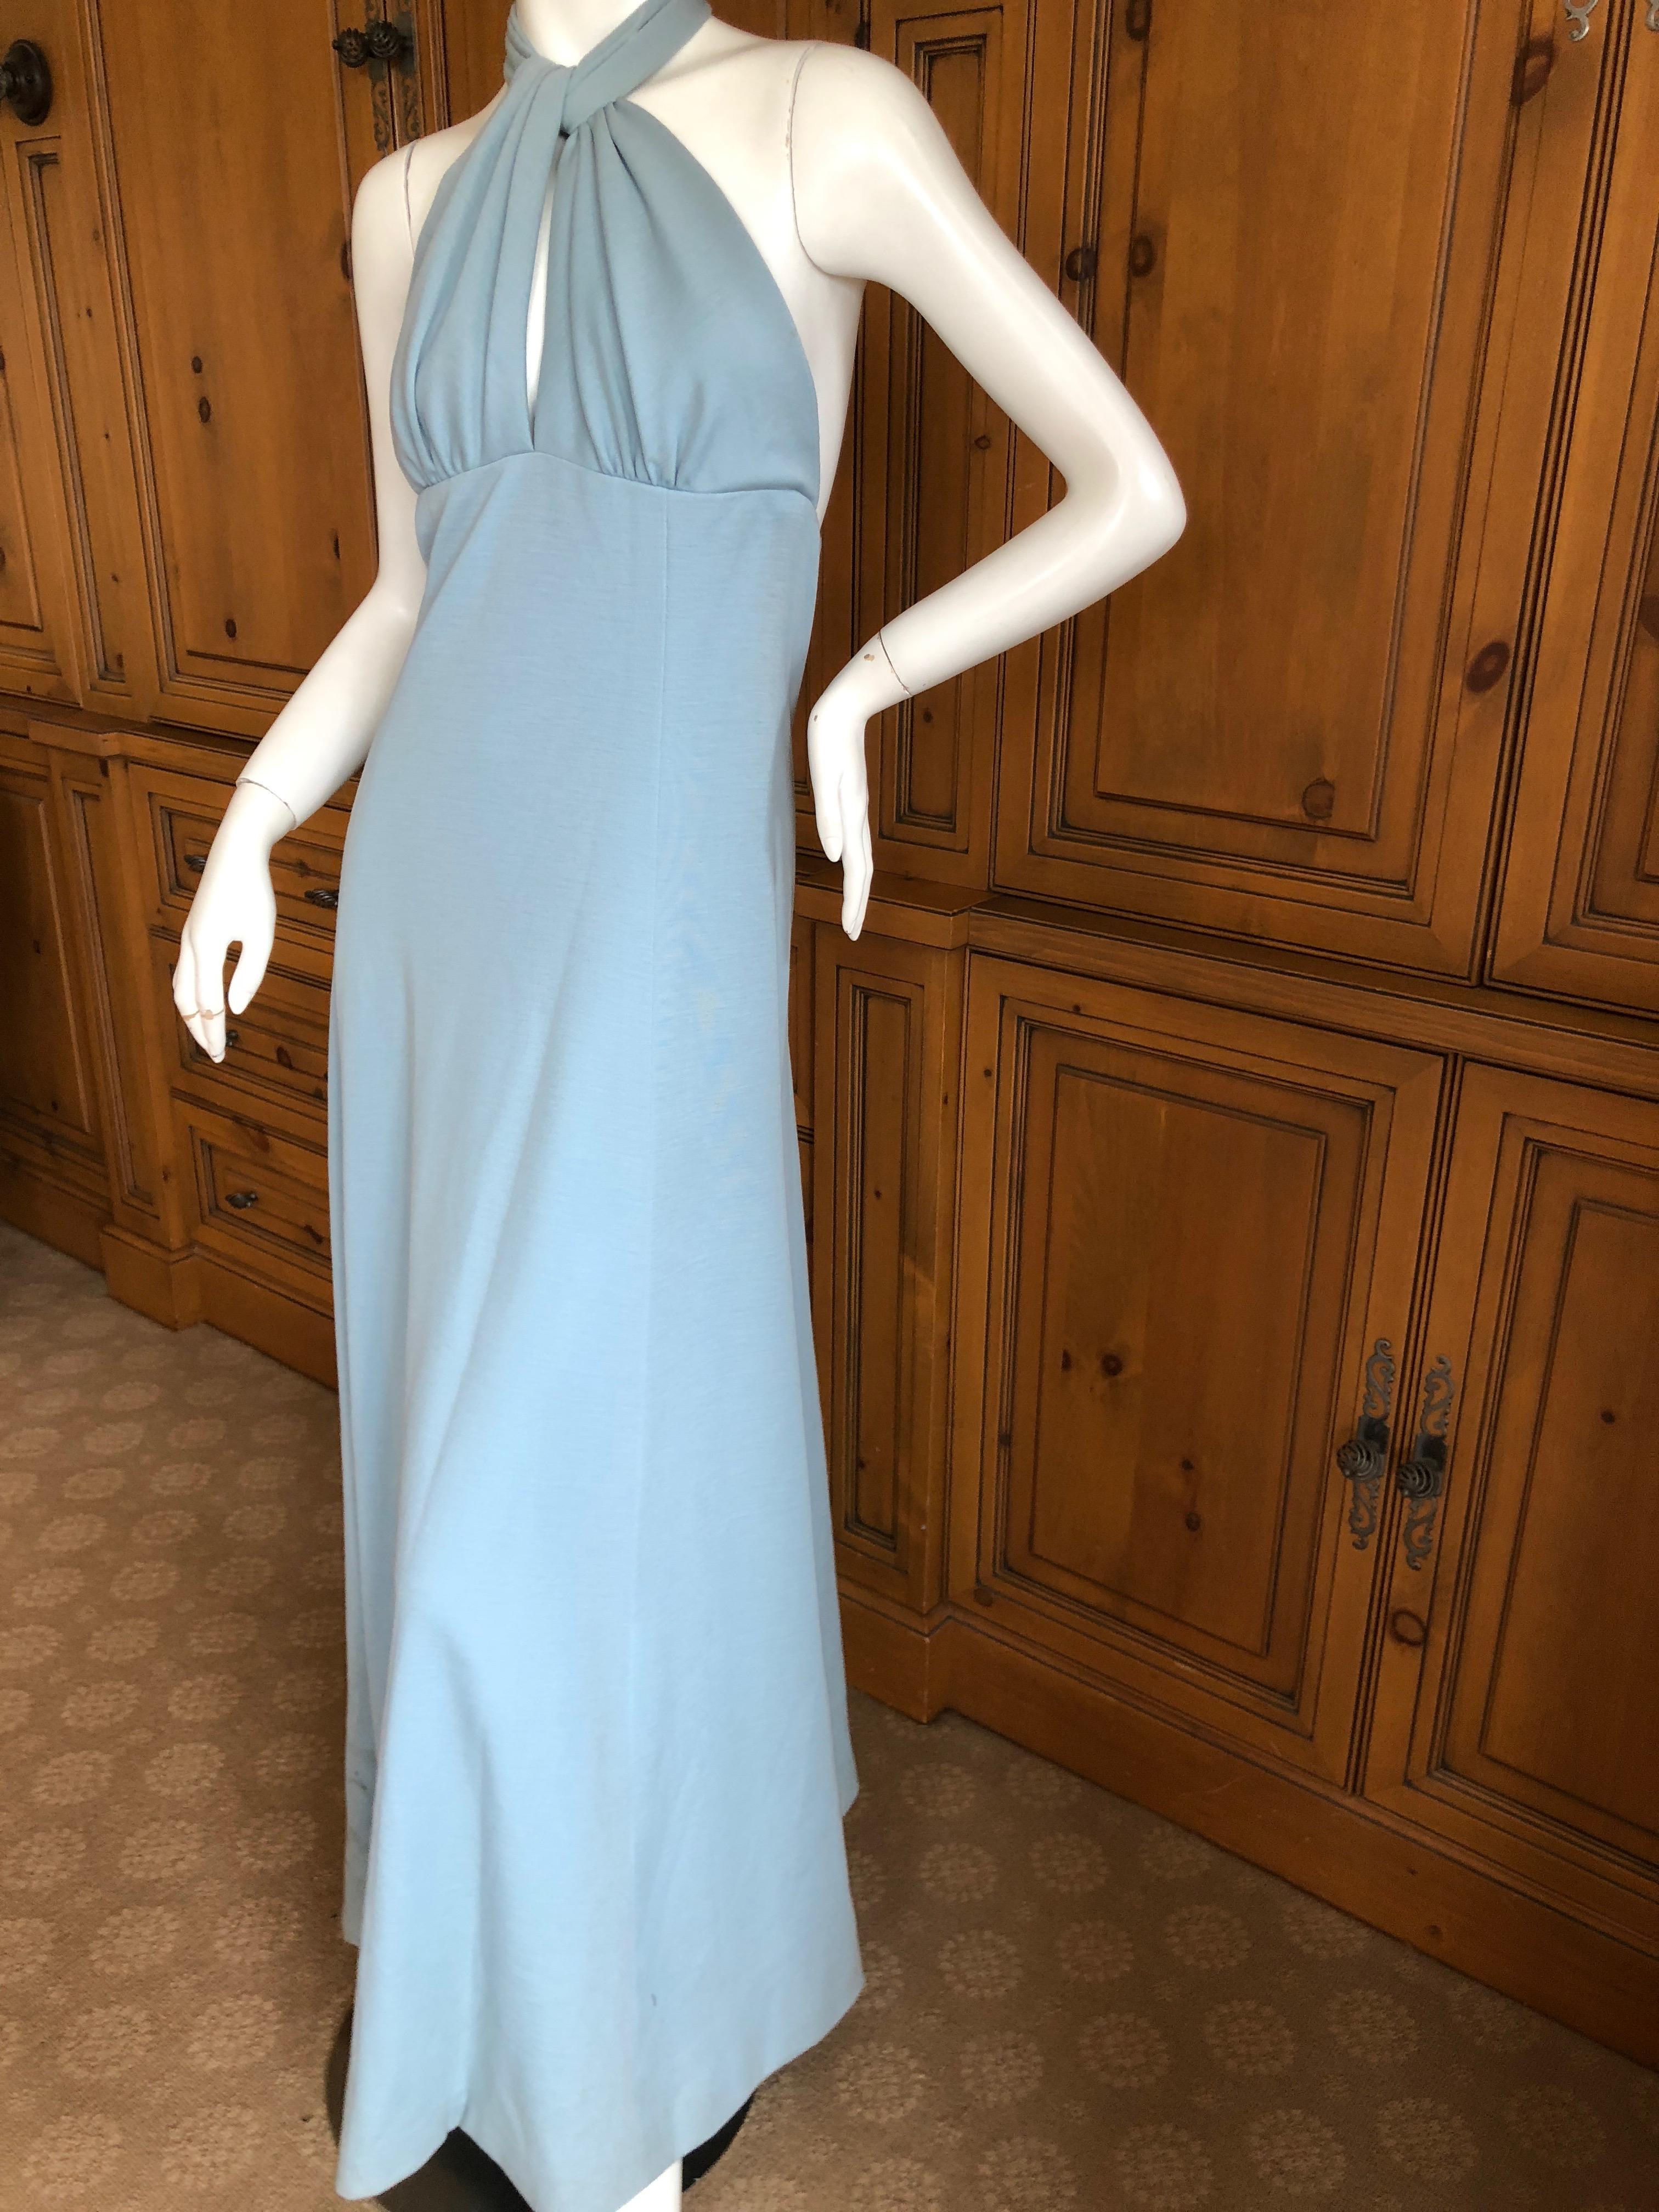 Cardinali Blue Crepe Jersey Keyhole Halter Evening Dress  Fall 1973 In Good Condition For Sale In Cloverdale, CA